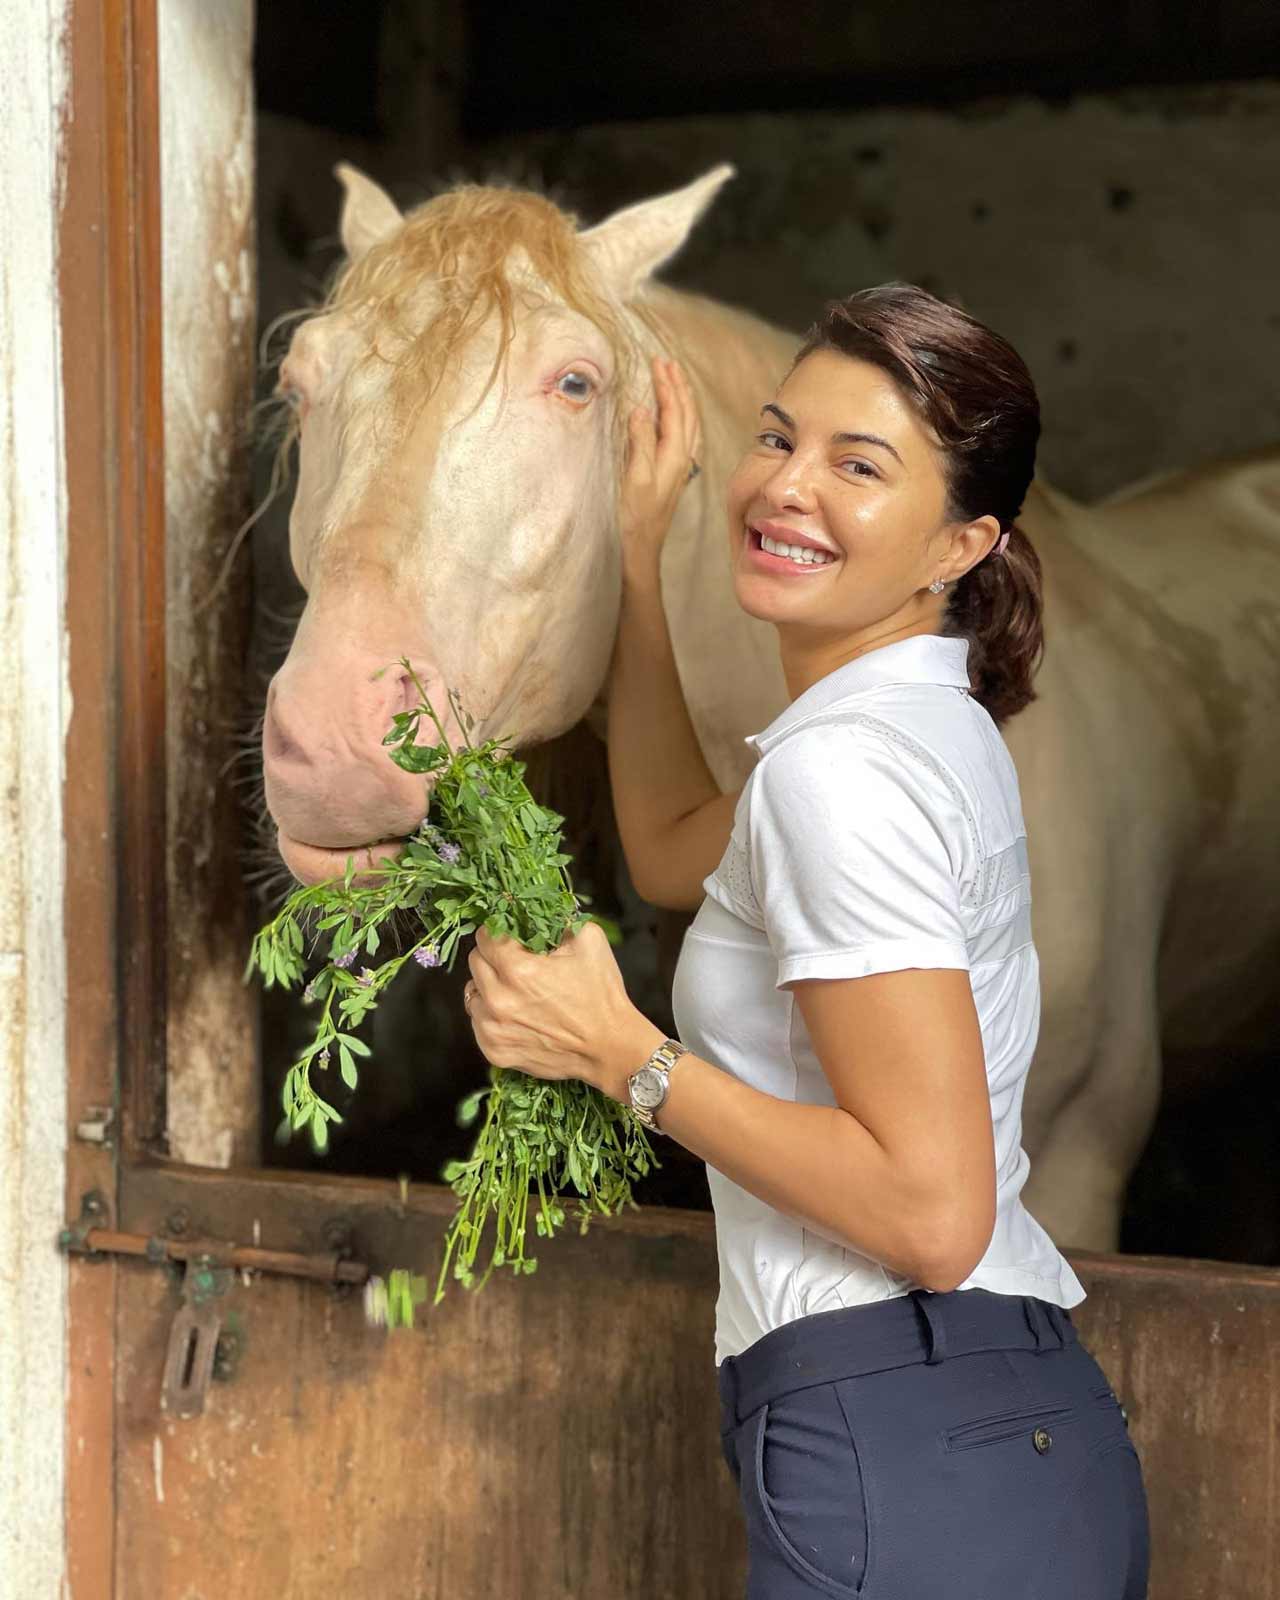 Jacqueline Fernandez: She turned into a vegan so as to do her bit in protecting the environment and safeguarding her health. However, Fernandez, like several fitness enthusiasts, struggled to manage a meal plan that eliminates eggs. Jacqueline said, 